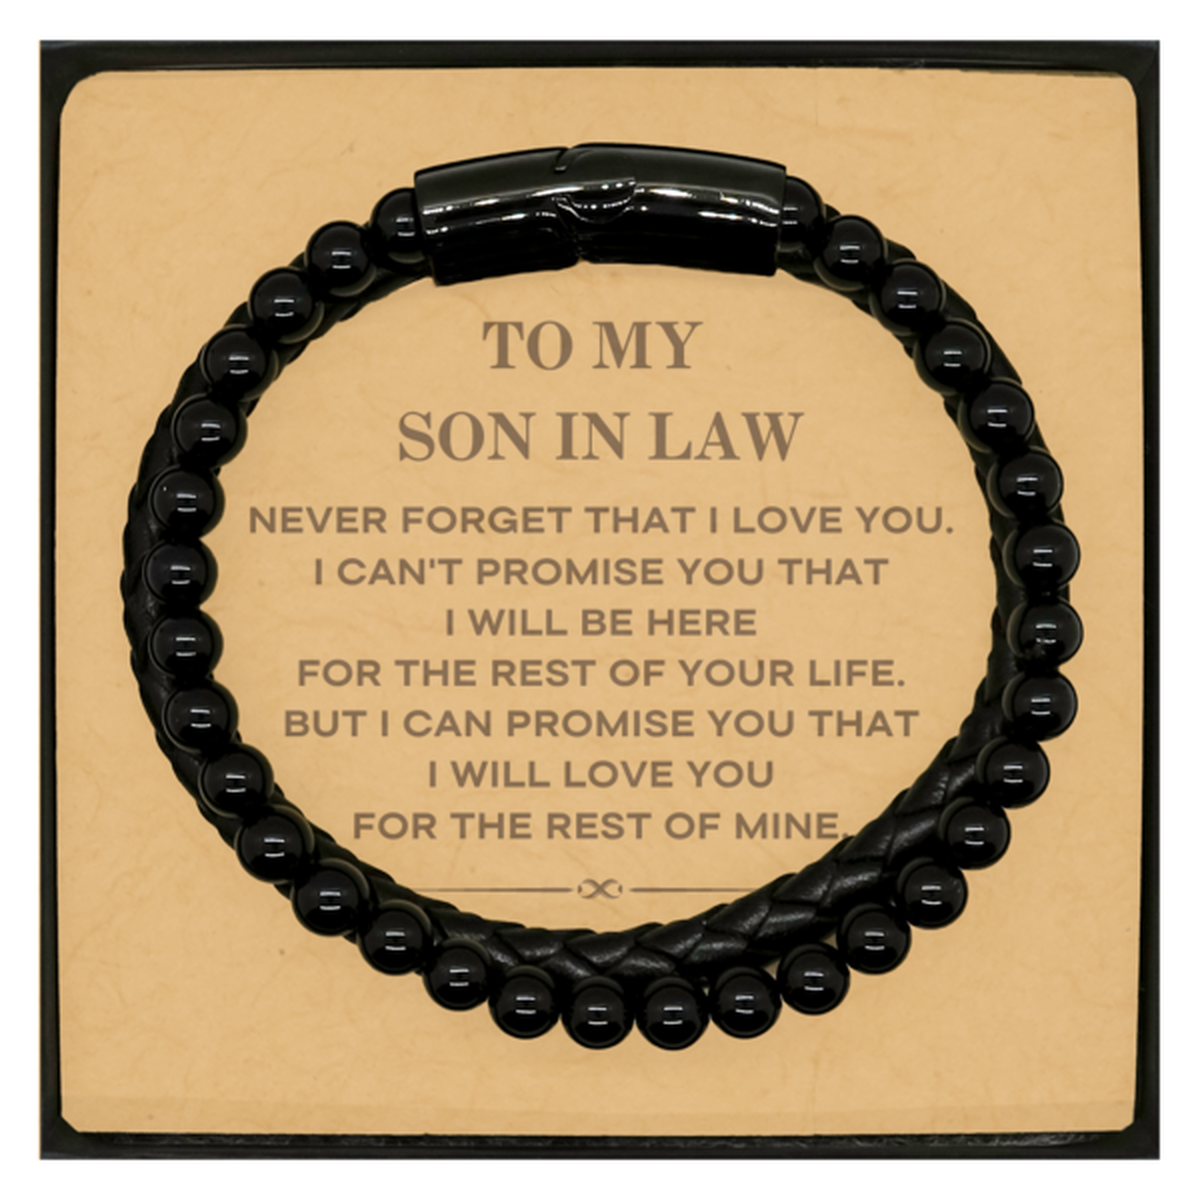 To My Son In Law Gifts, I will love you for the rest of mine, Love Son In Law Bracelet, Birthday Christmas Unique Stone Leather Bracelets For Son In Law